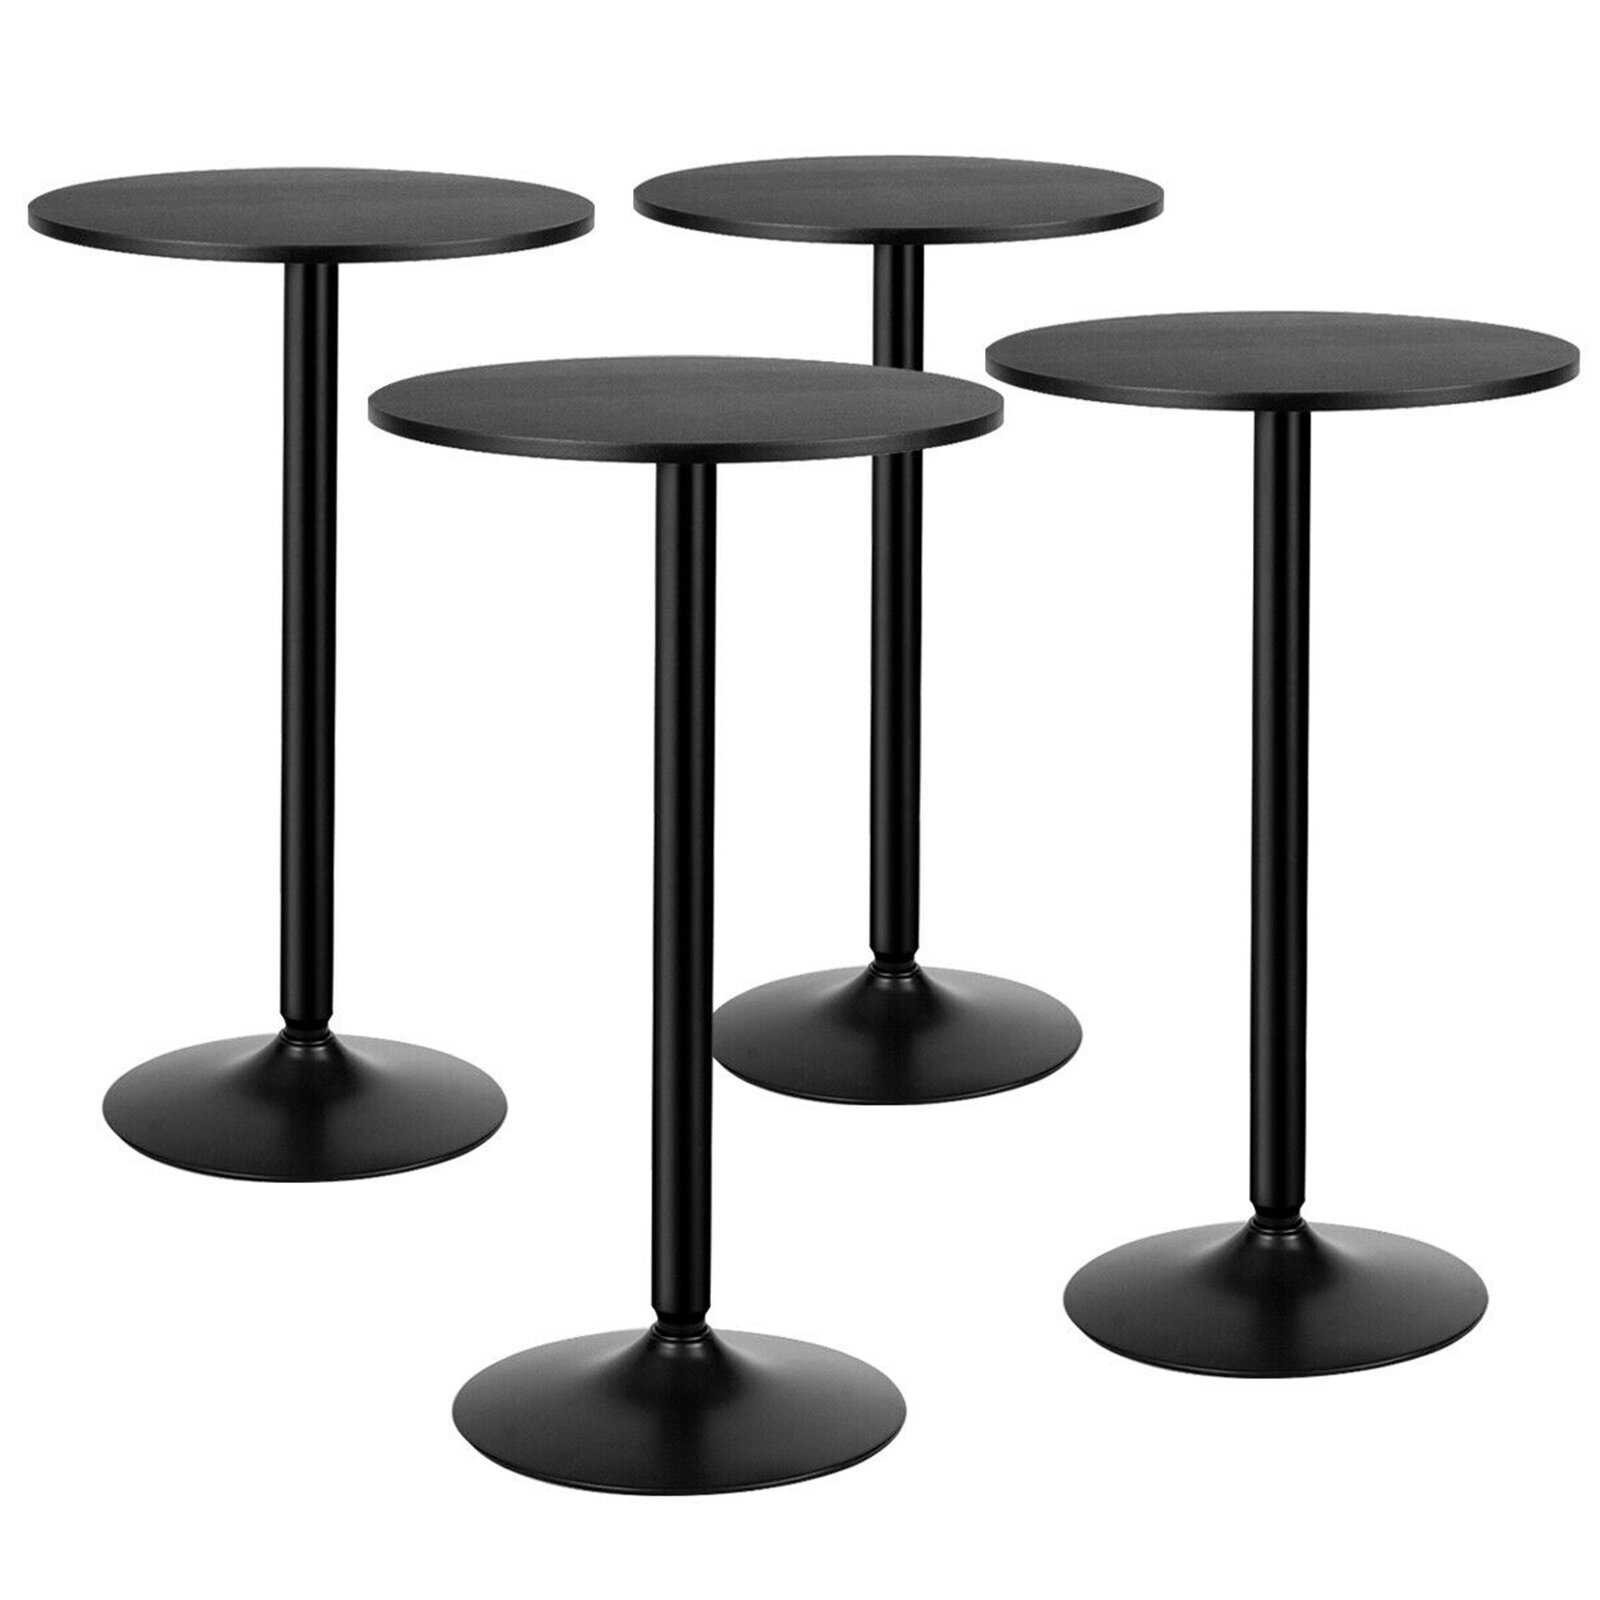 Set of 4 Classic Style Counter Height Tulip Tables